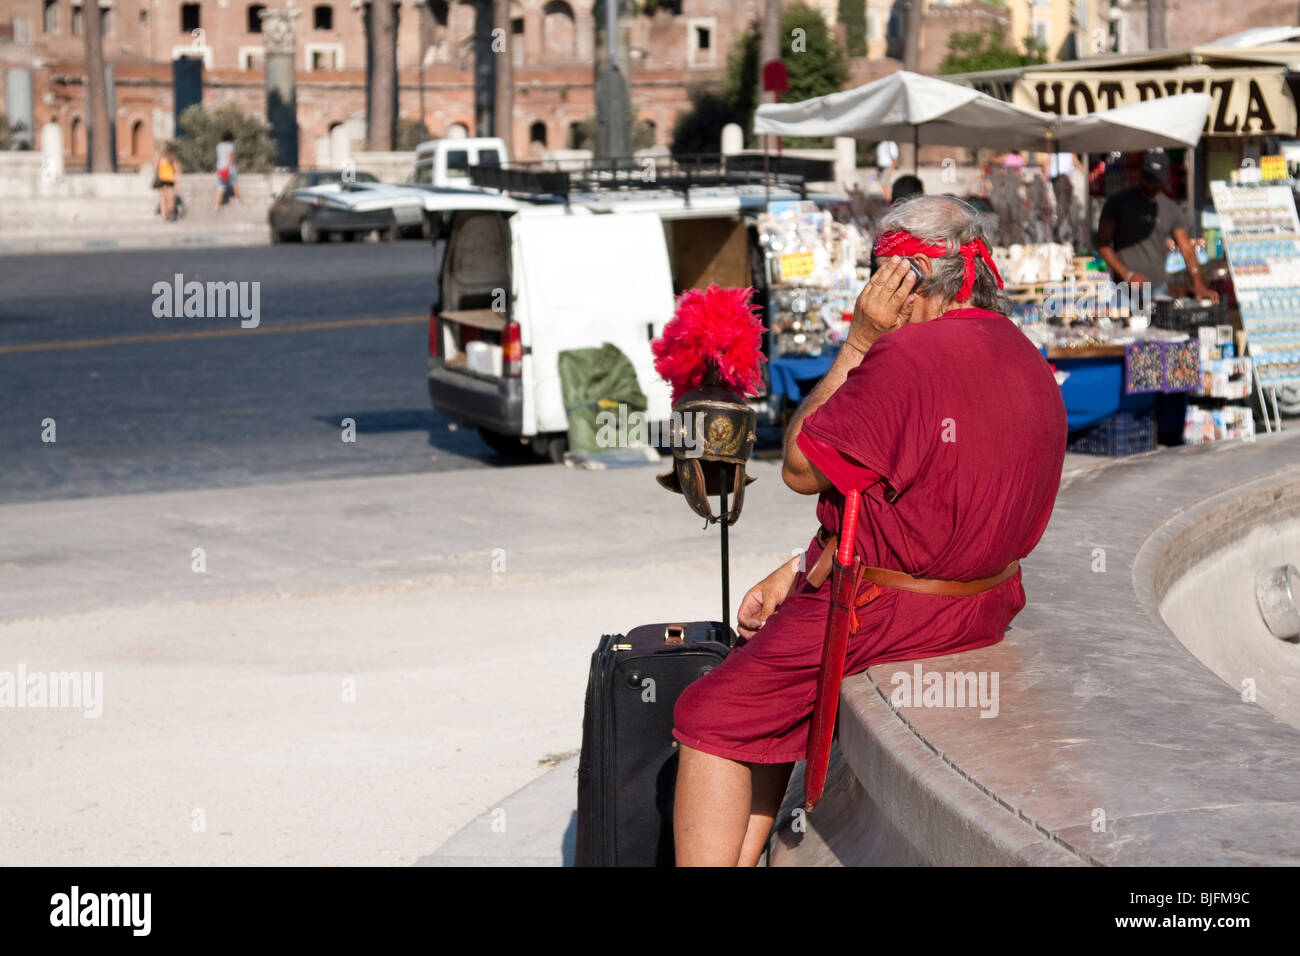 Man dressed as Roman Gladiator in the street of Rome speaking at his mobile phone. Rome, Italy Stock Photo